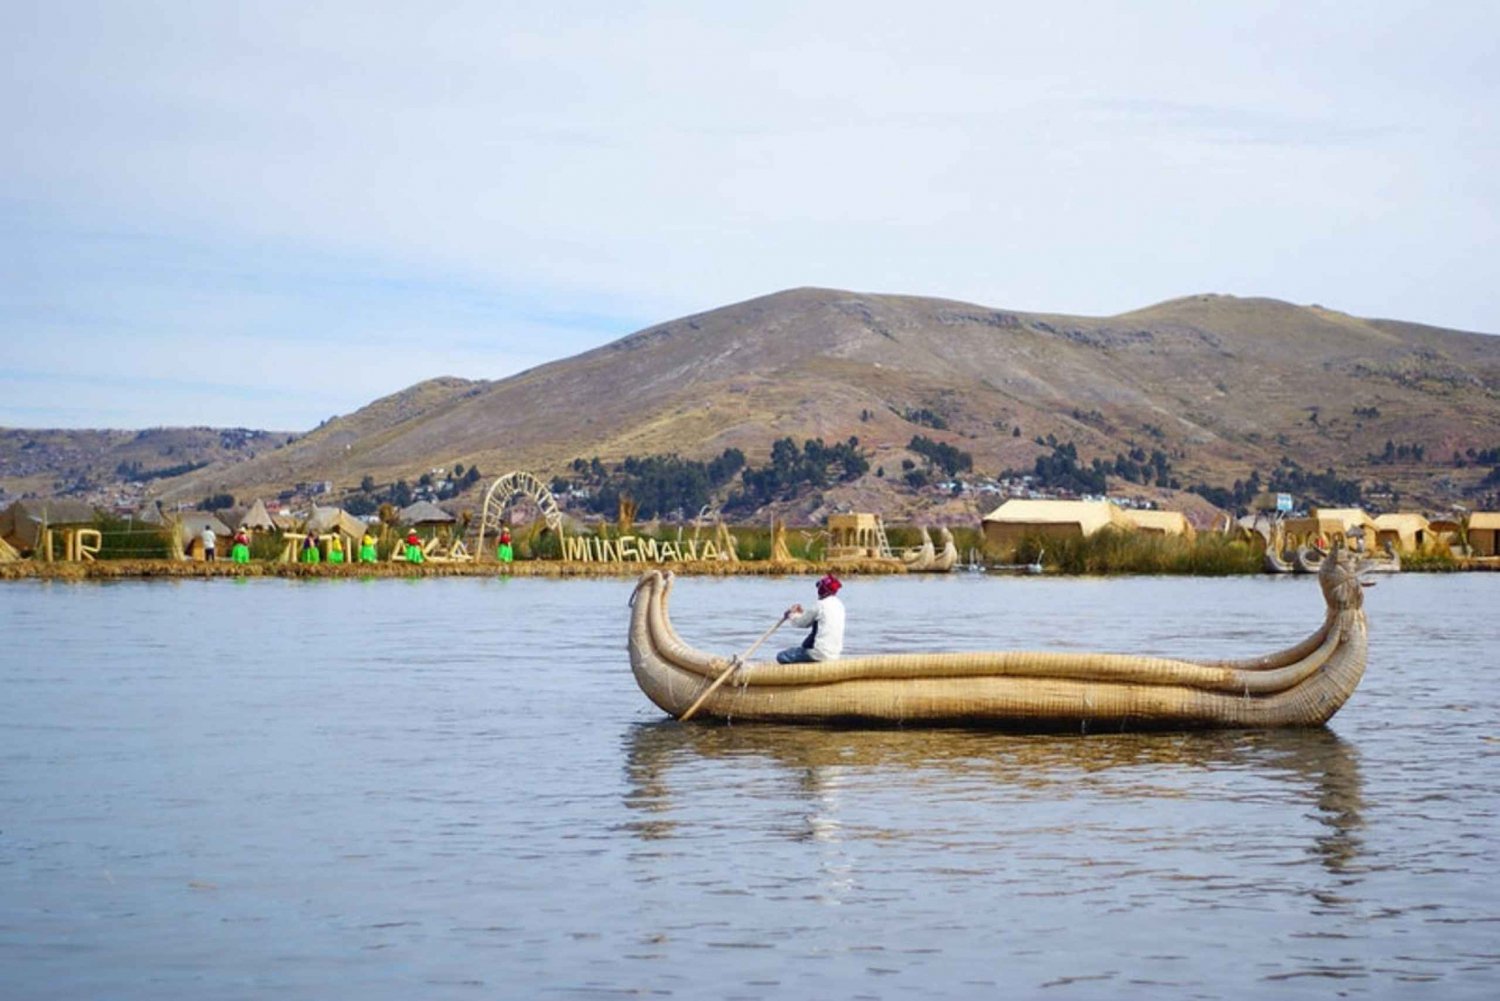 Lake Titicaca 2-Day Tour to Uros, Amantani and Taquile